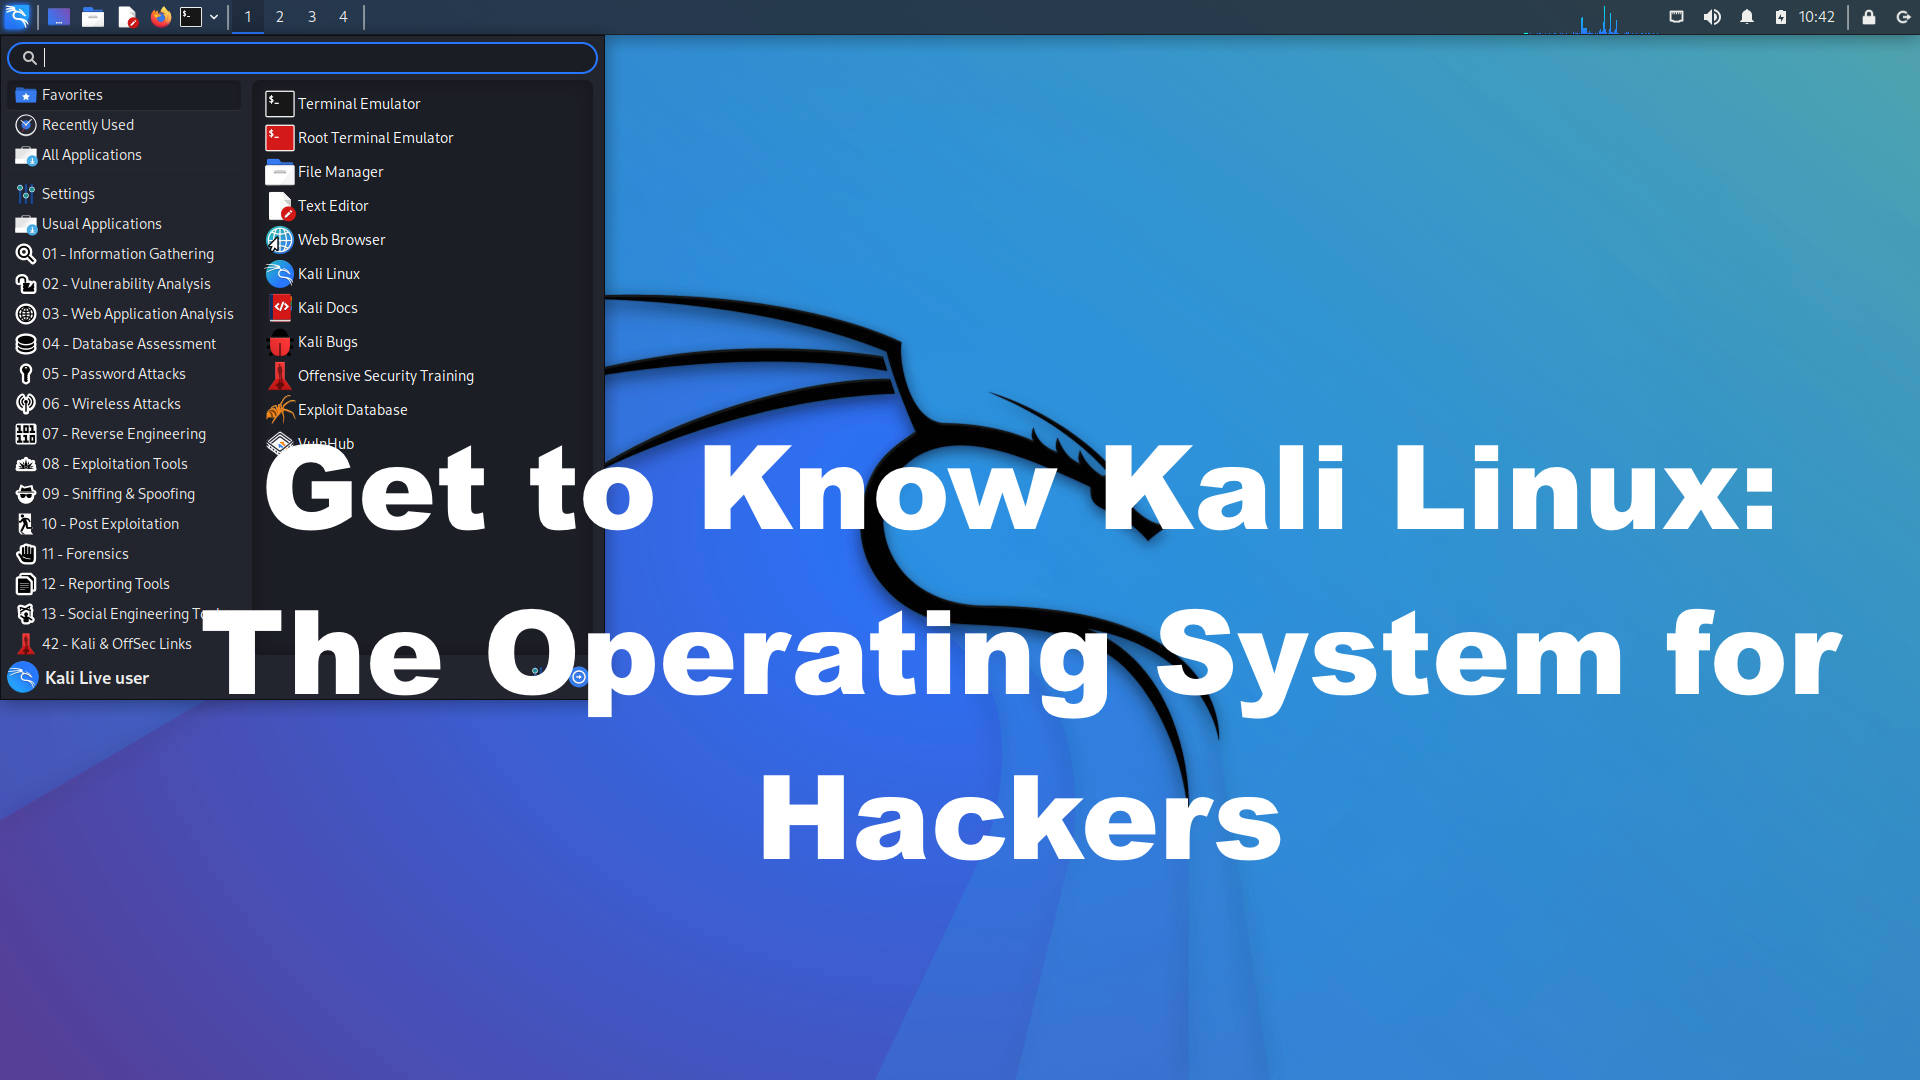 Get to Know Kali Linux: The Operating System for Hackers